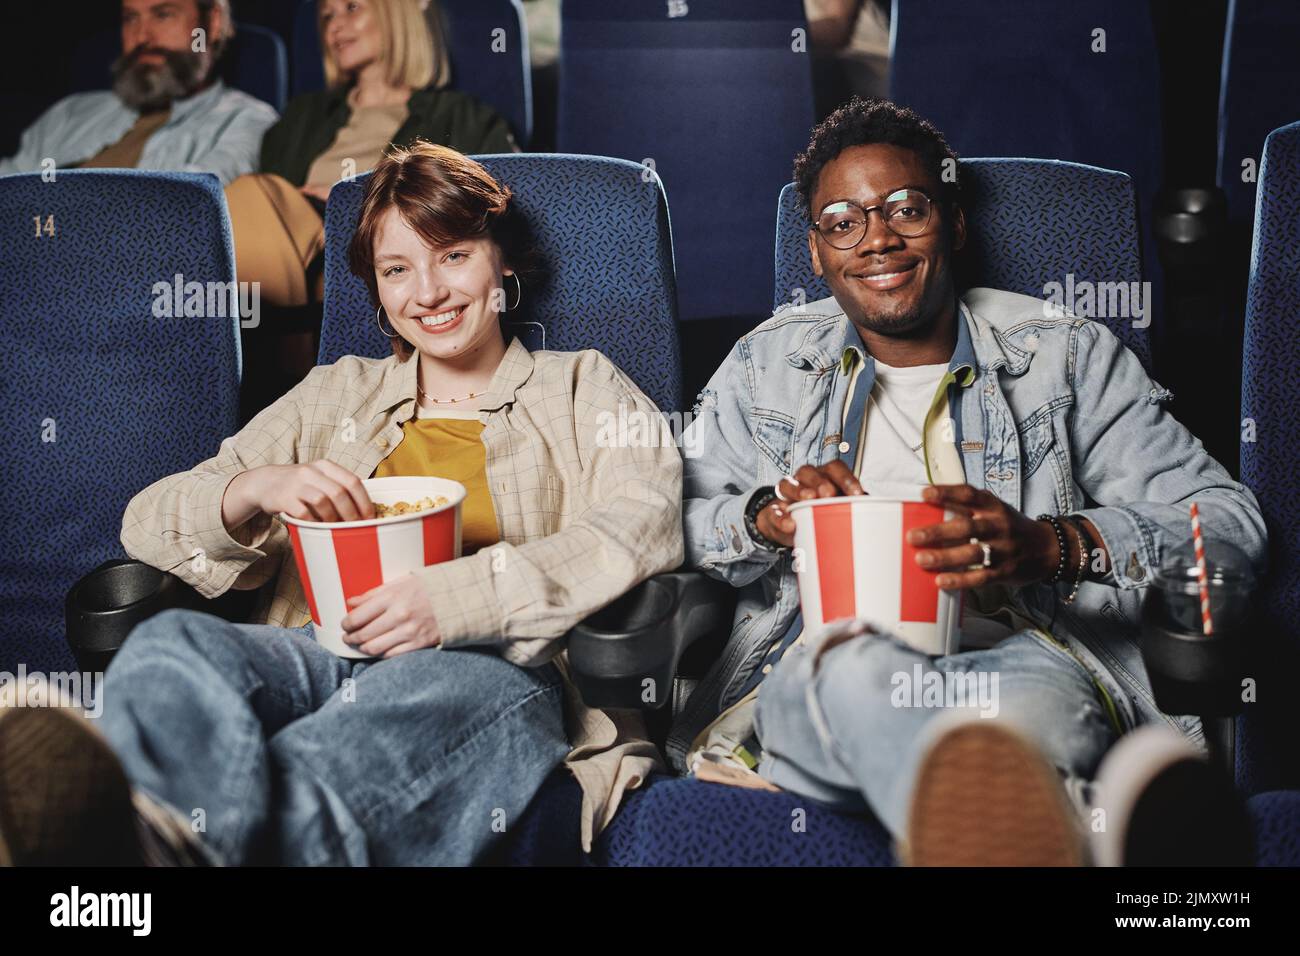 Portrait of stylish young Black man and Caucasian wiman sitting relaxed with popcorn on lap at cinema smiling at camera Stock Photo